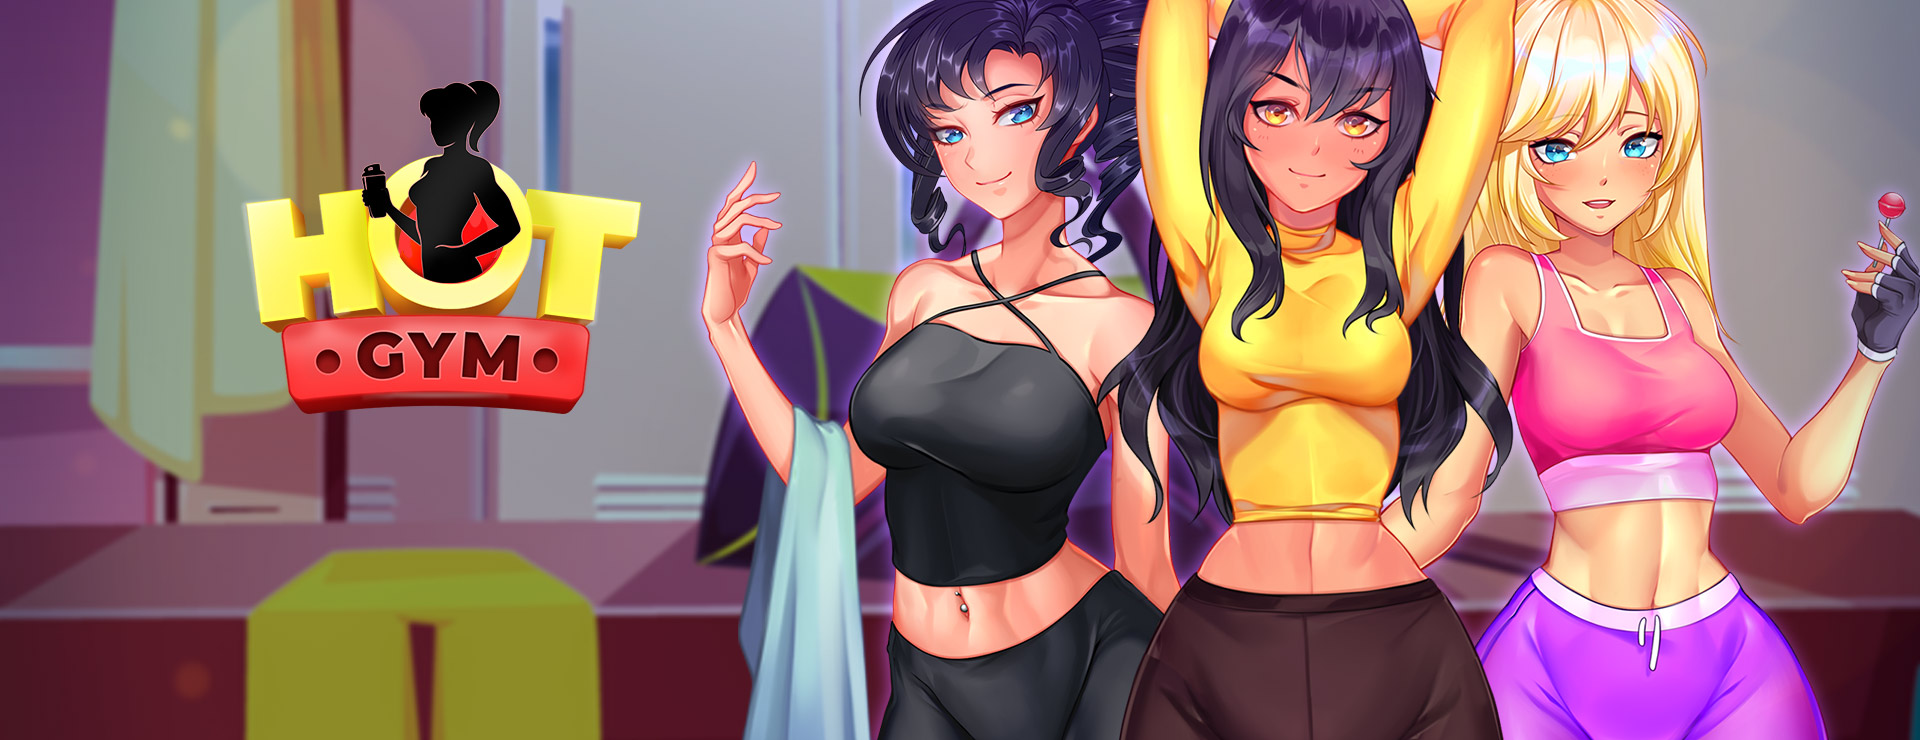 Hot Gym Game - Casual ゲーム